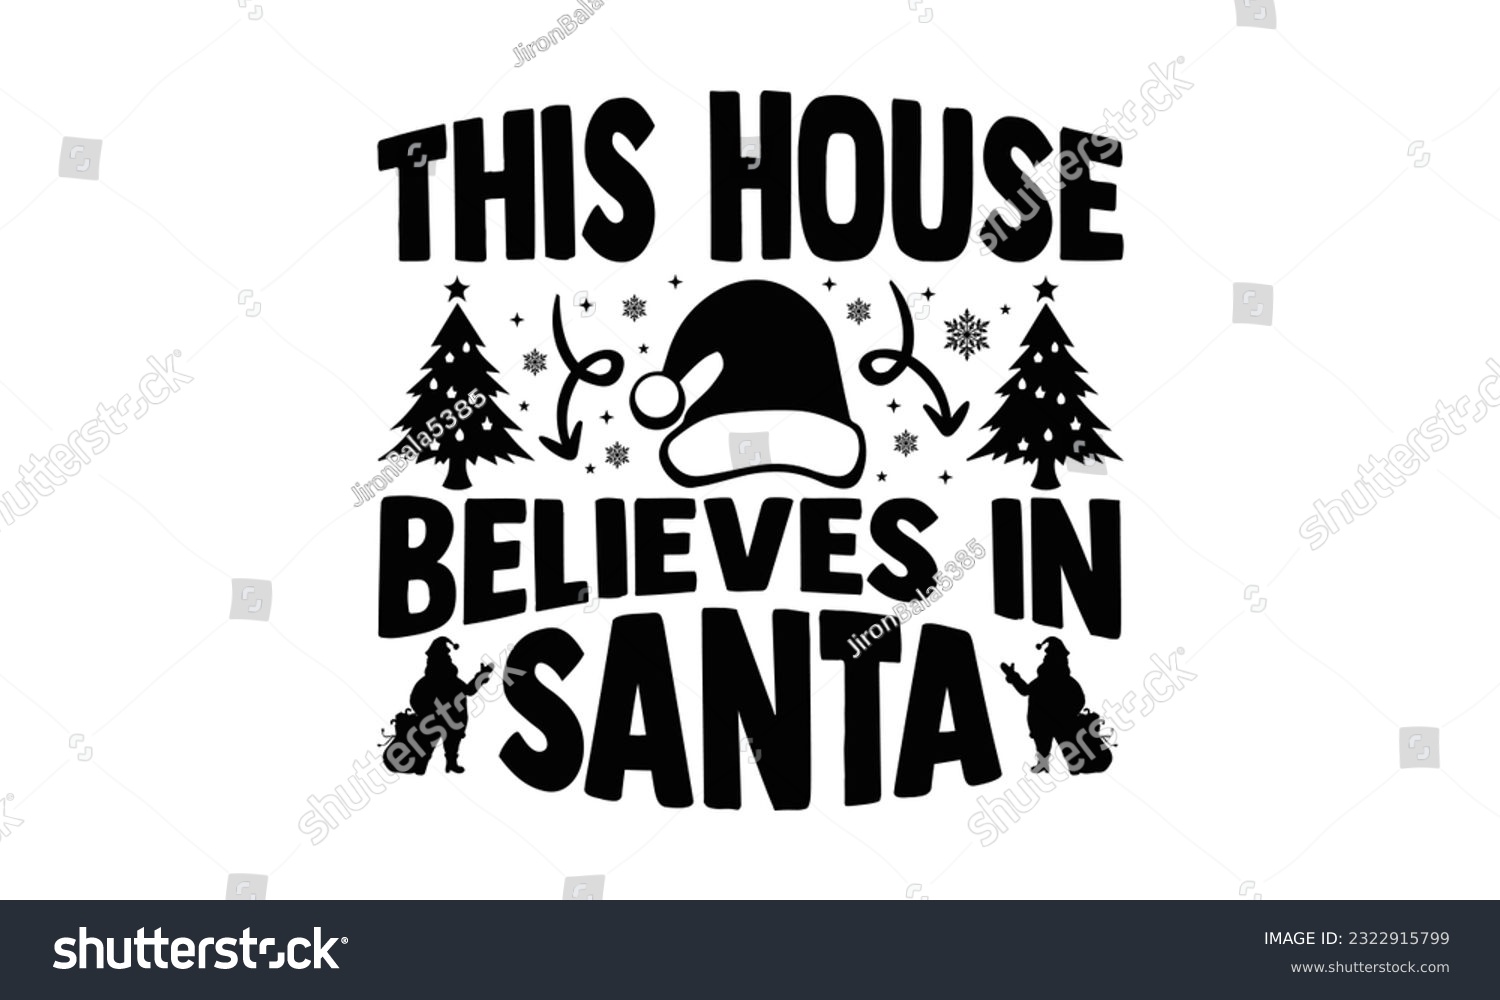 SVG of  This House Believes In Santa - Christmas SVG Design, typography design, this illustration can be used as a print on t-shirts and bags, stationary or as a poster. svg